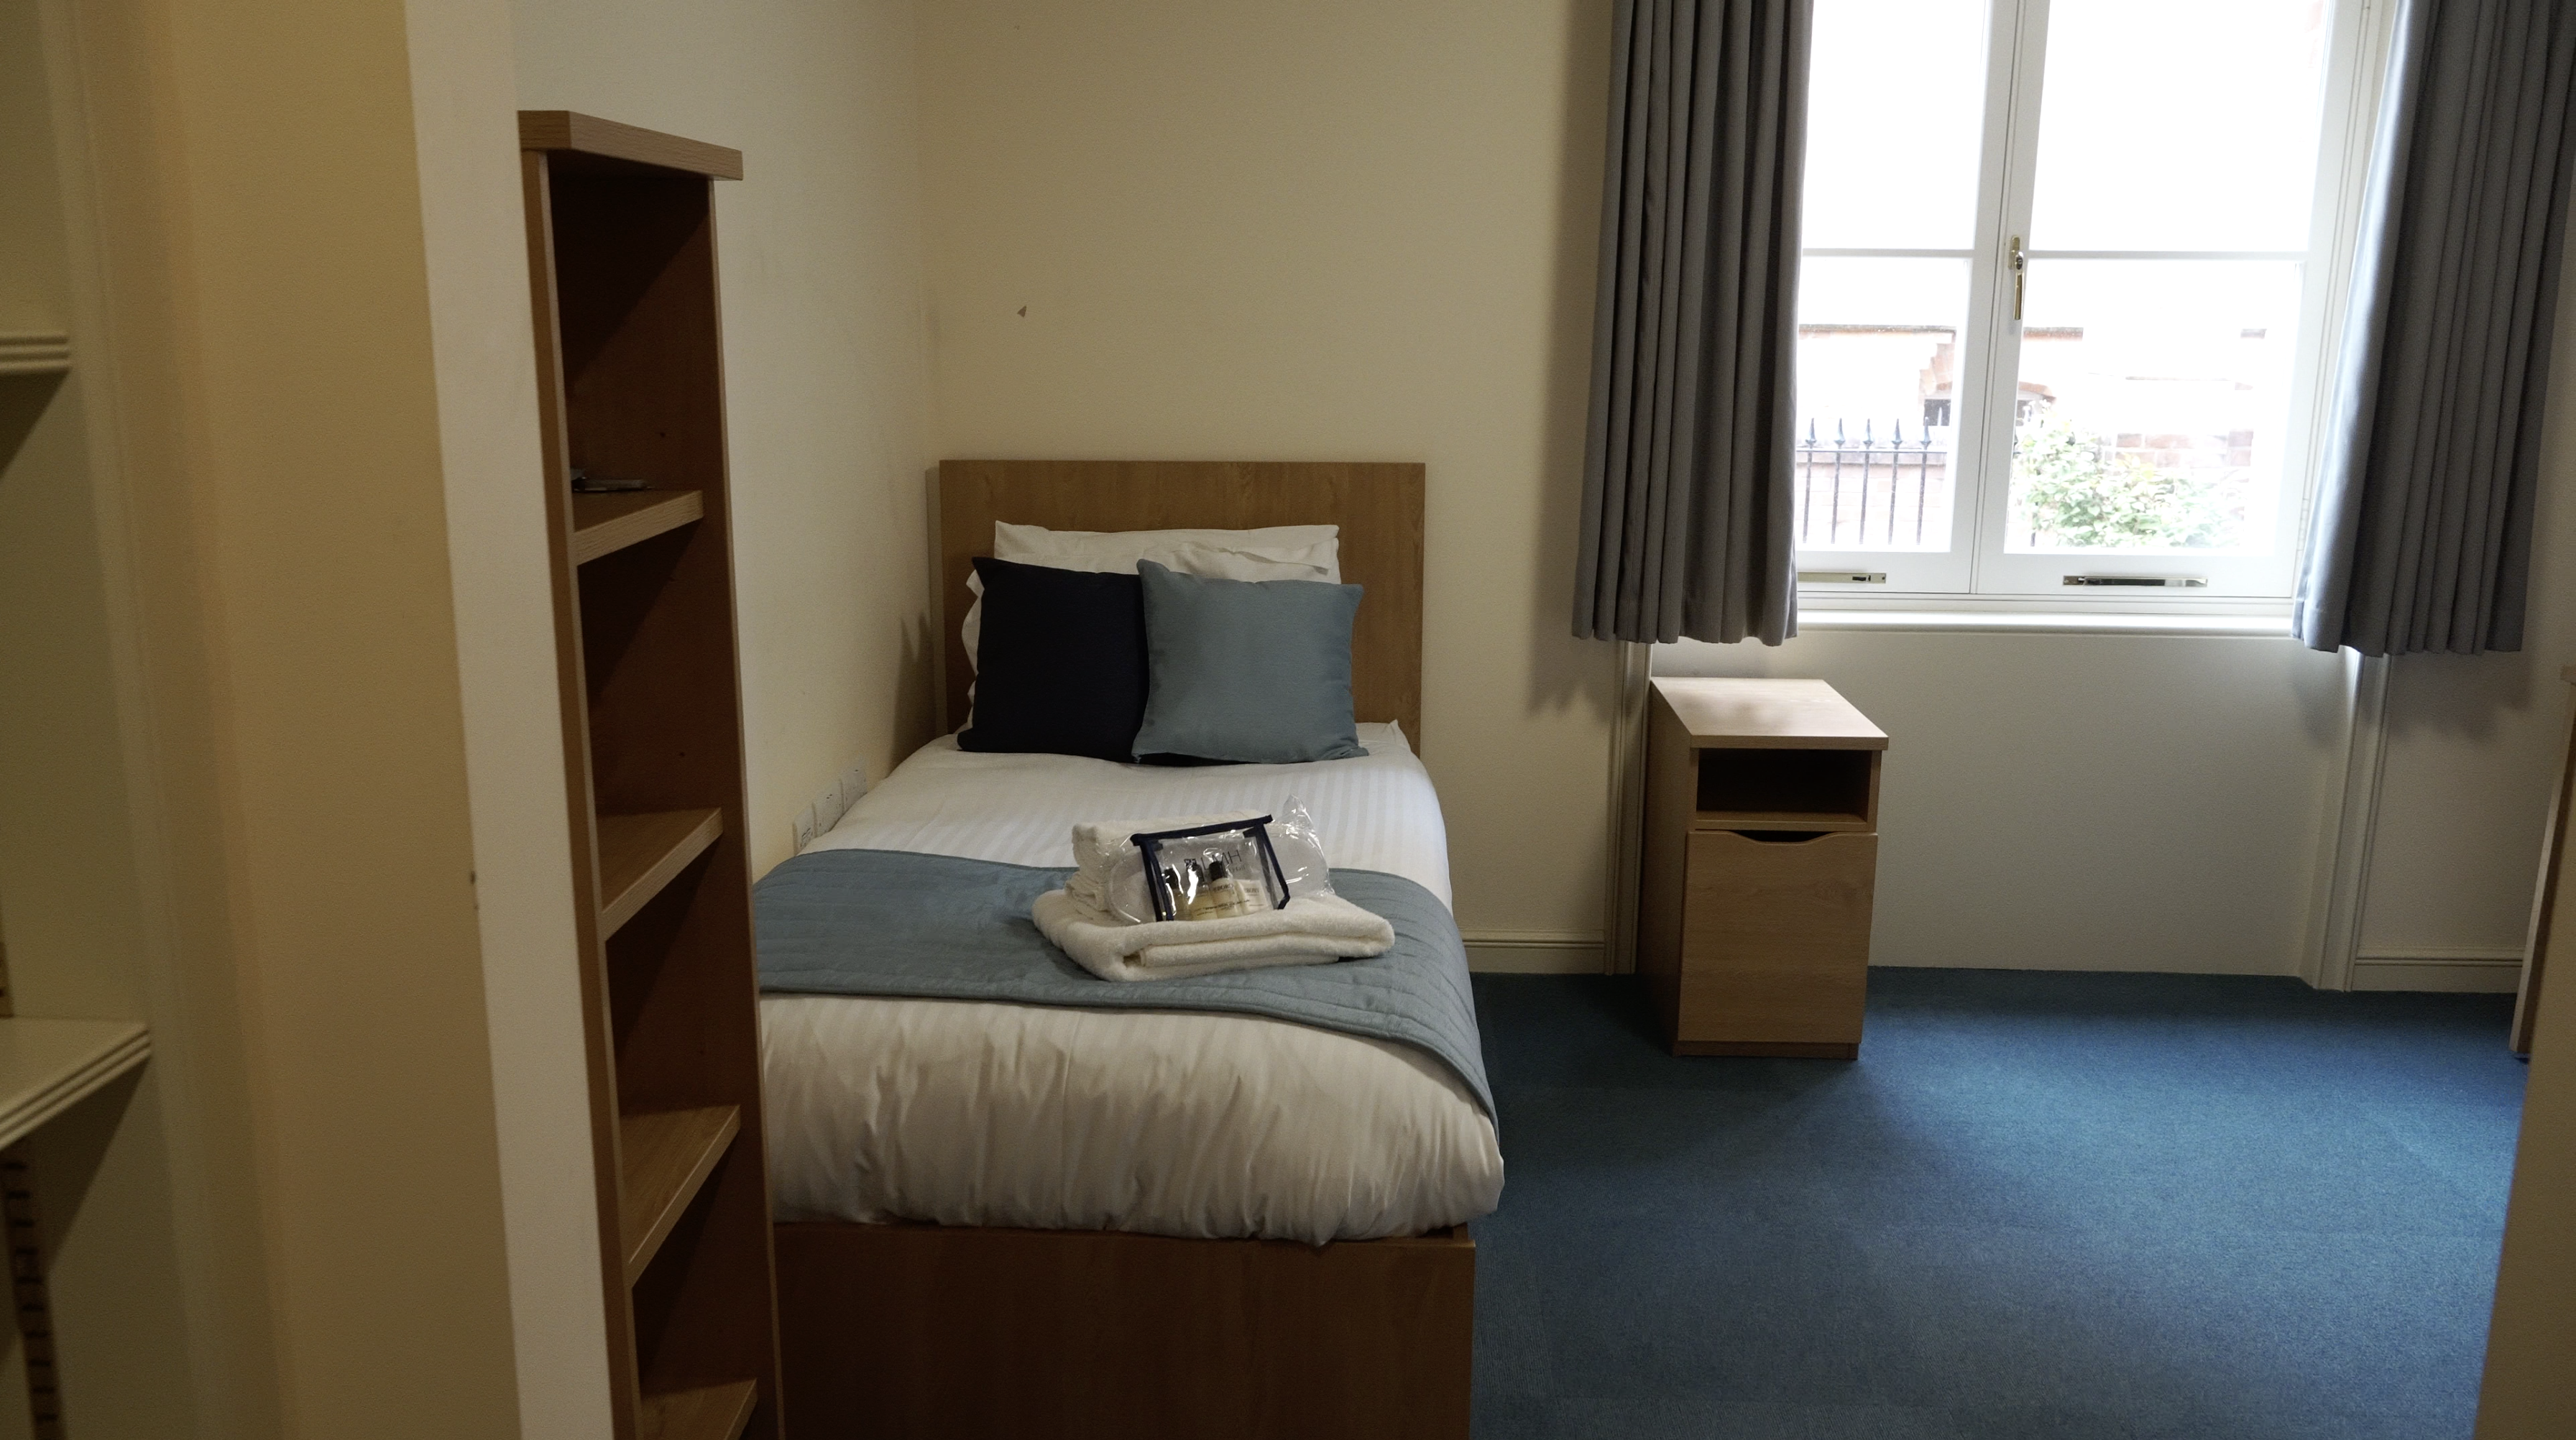 Picture of Graduate room at LMH showing a bed and a window